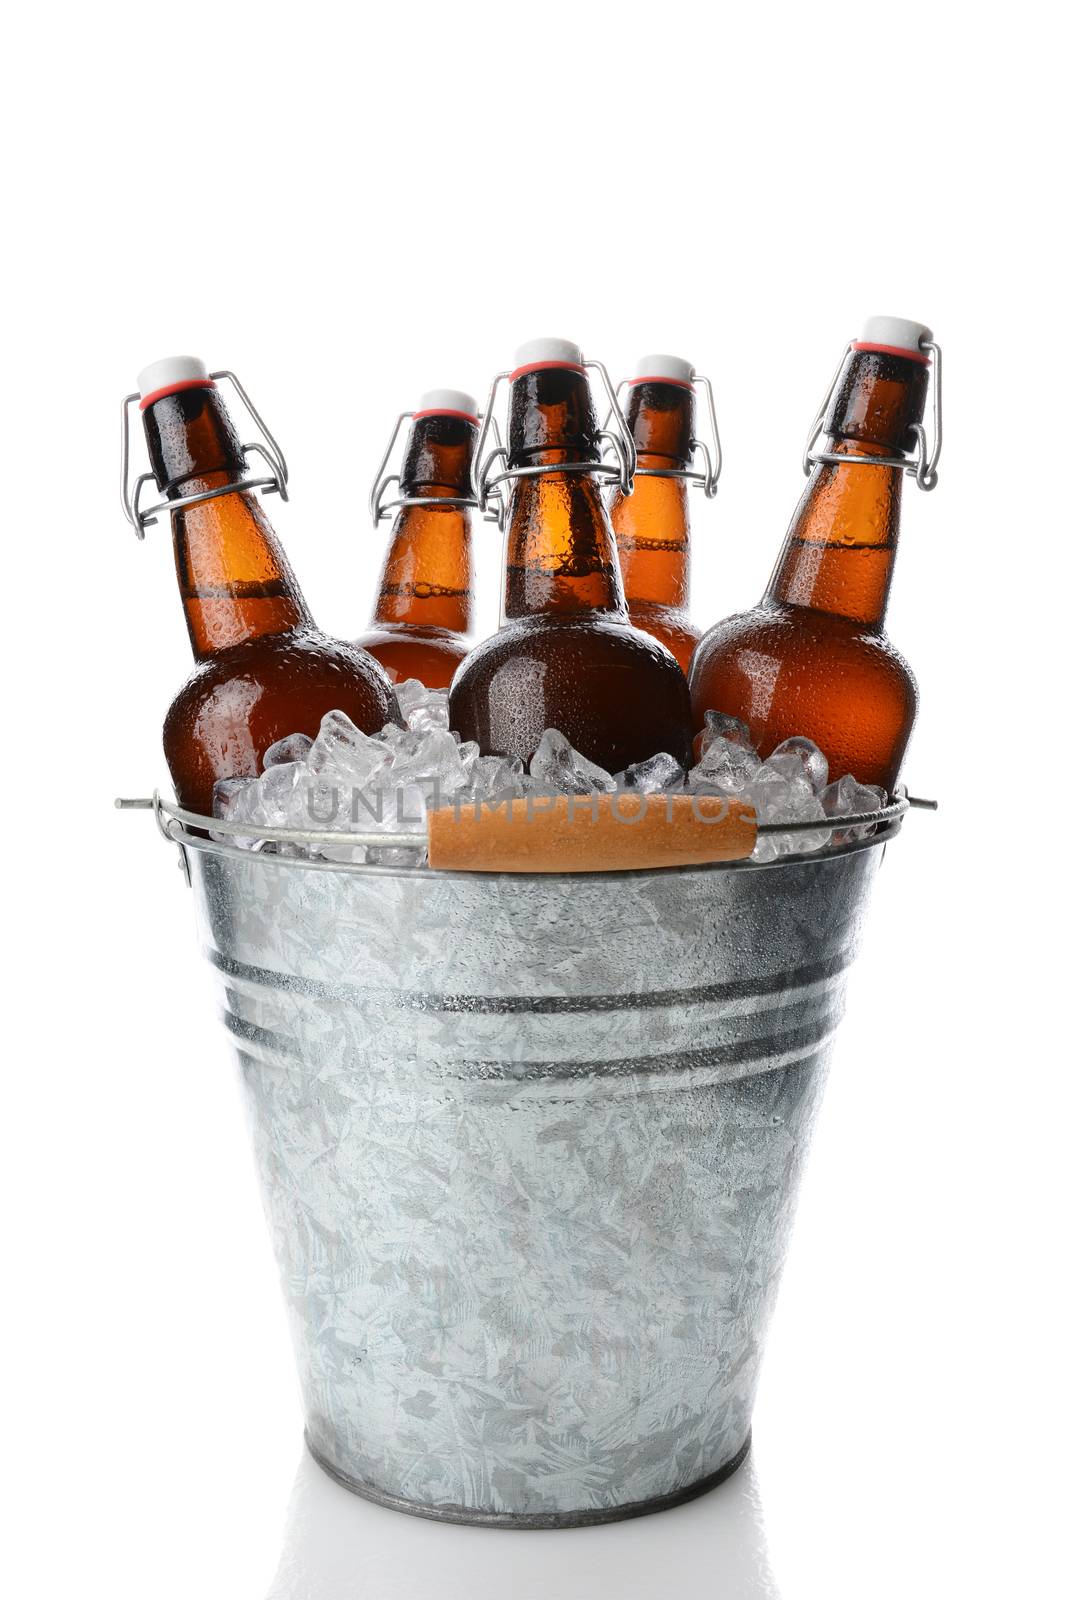 Closeup of a party bucket filled with ice and 5 brown swing top old fashioned beer bottles. Vertical format on white with reflection.